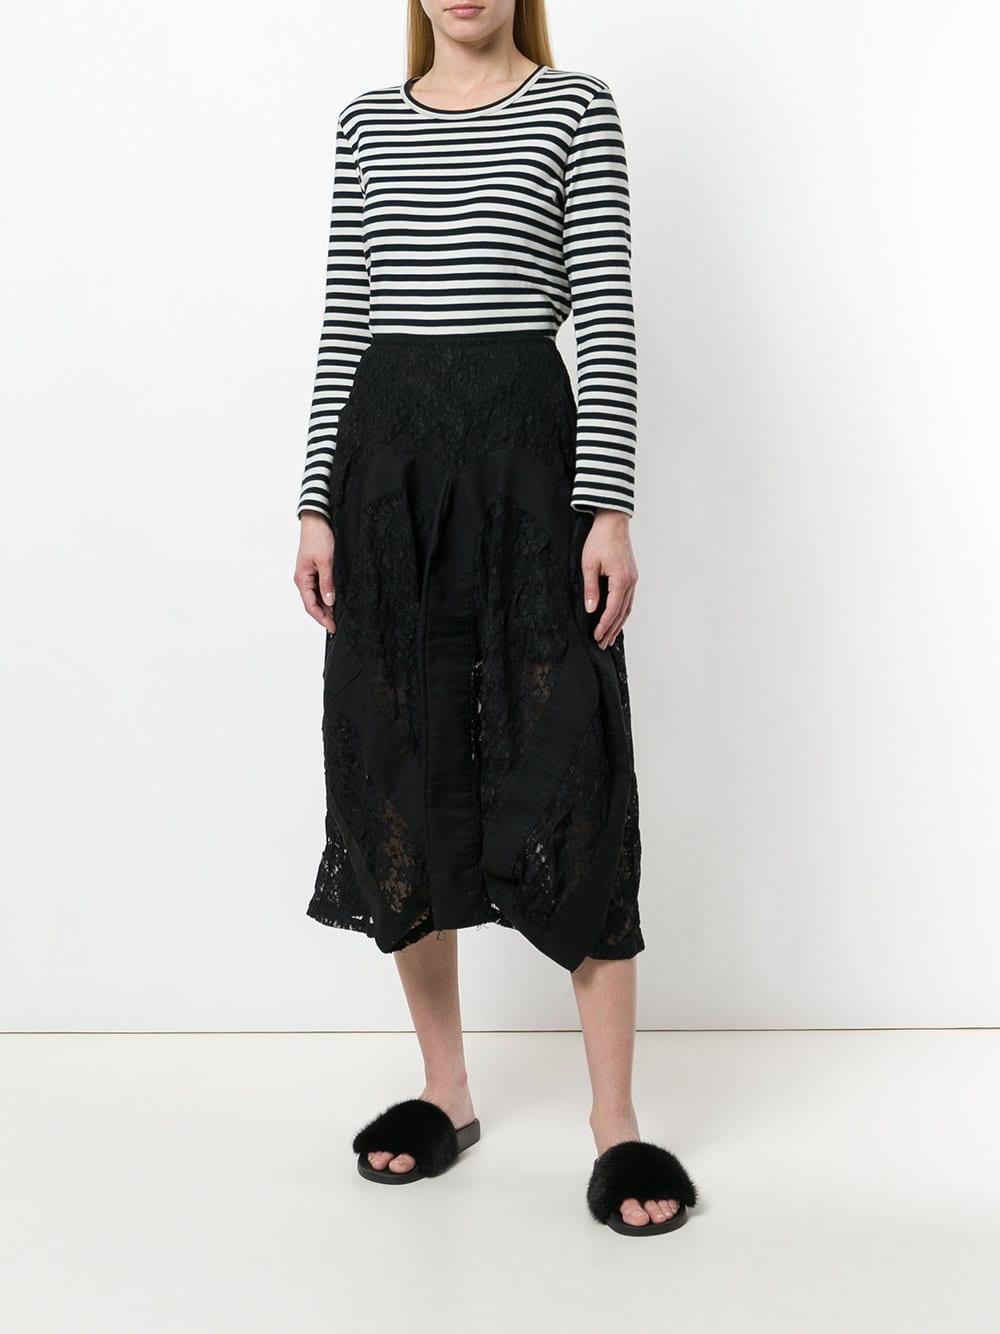 A.N.G.E.L.O. VINTAGE - Italy

Junya Watanabe Comme Des Garçons black lace skirt with high waist, black cotton fabric inserts, back hook and zip closure, medium length, draped design, lace panels and distressed finish.

Years: 90s

Size: M

Made in